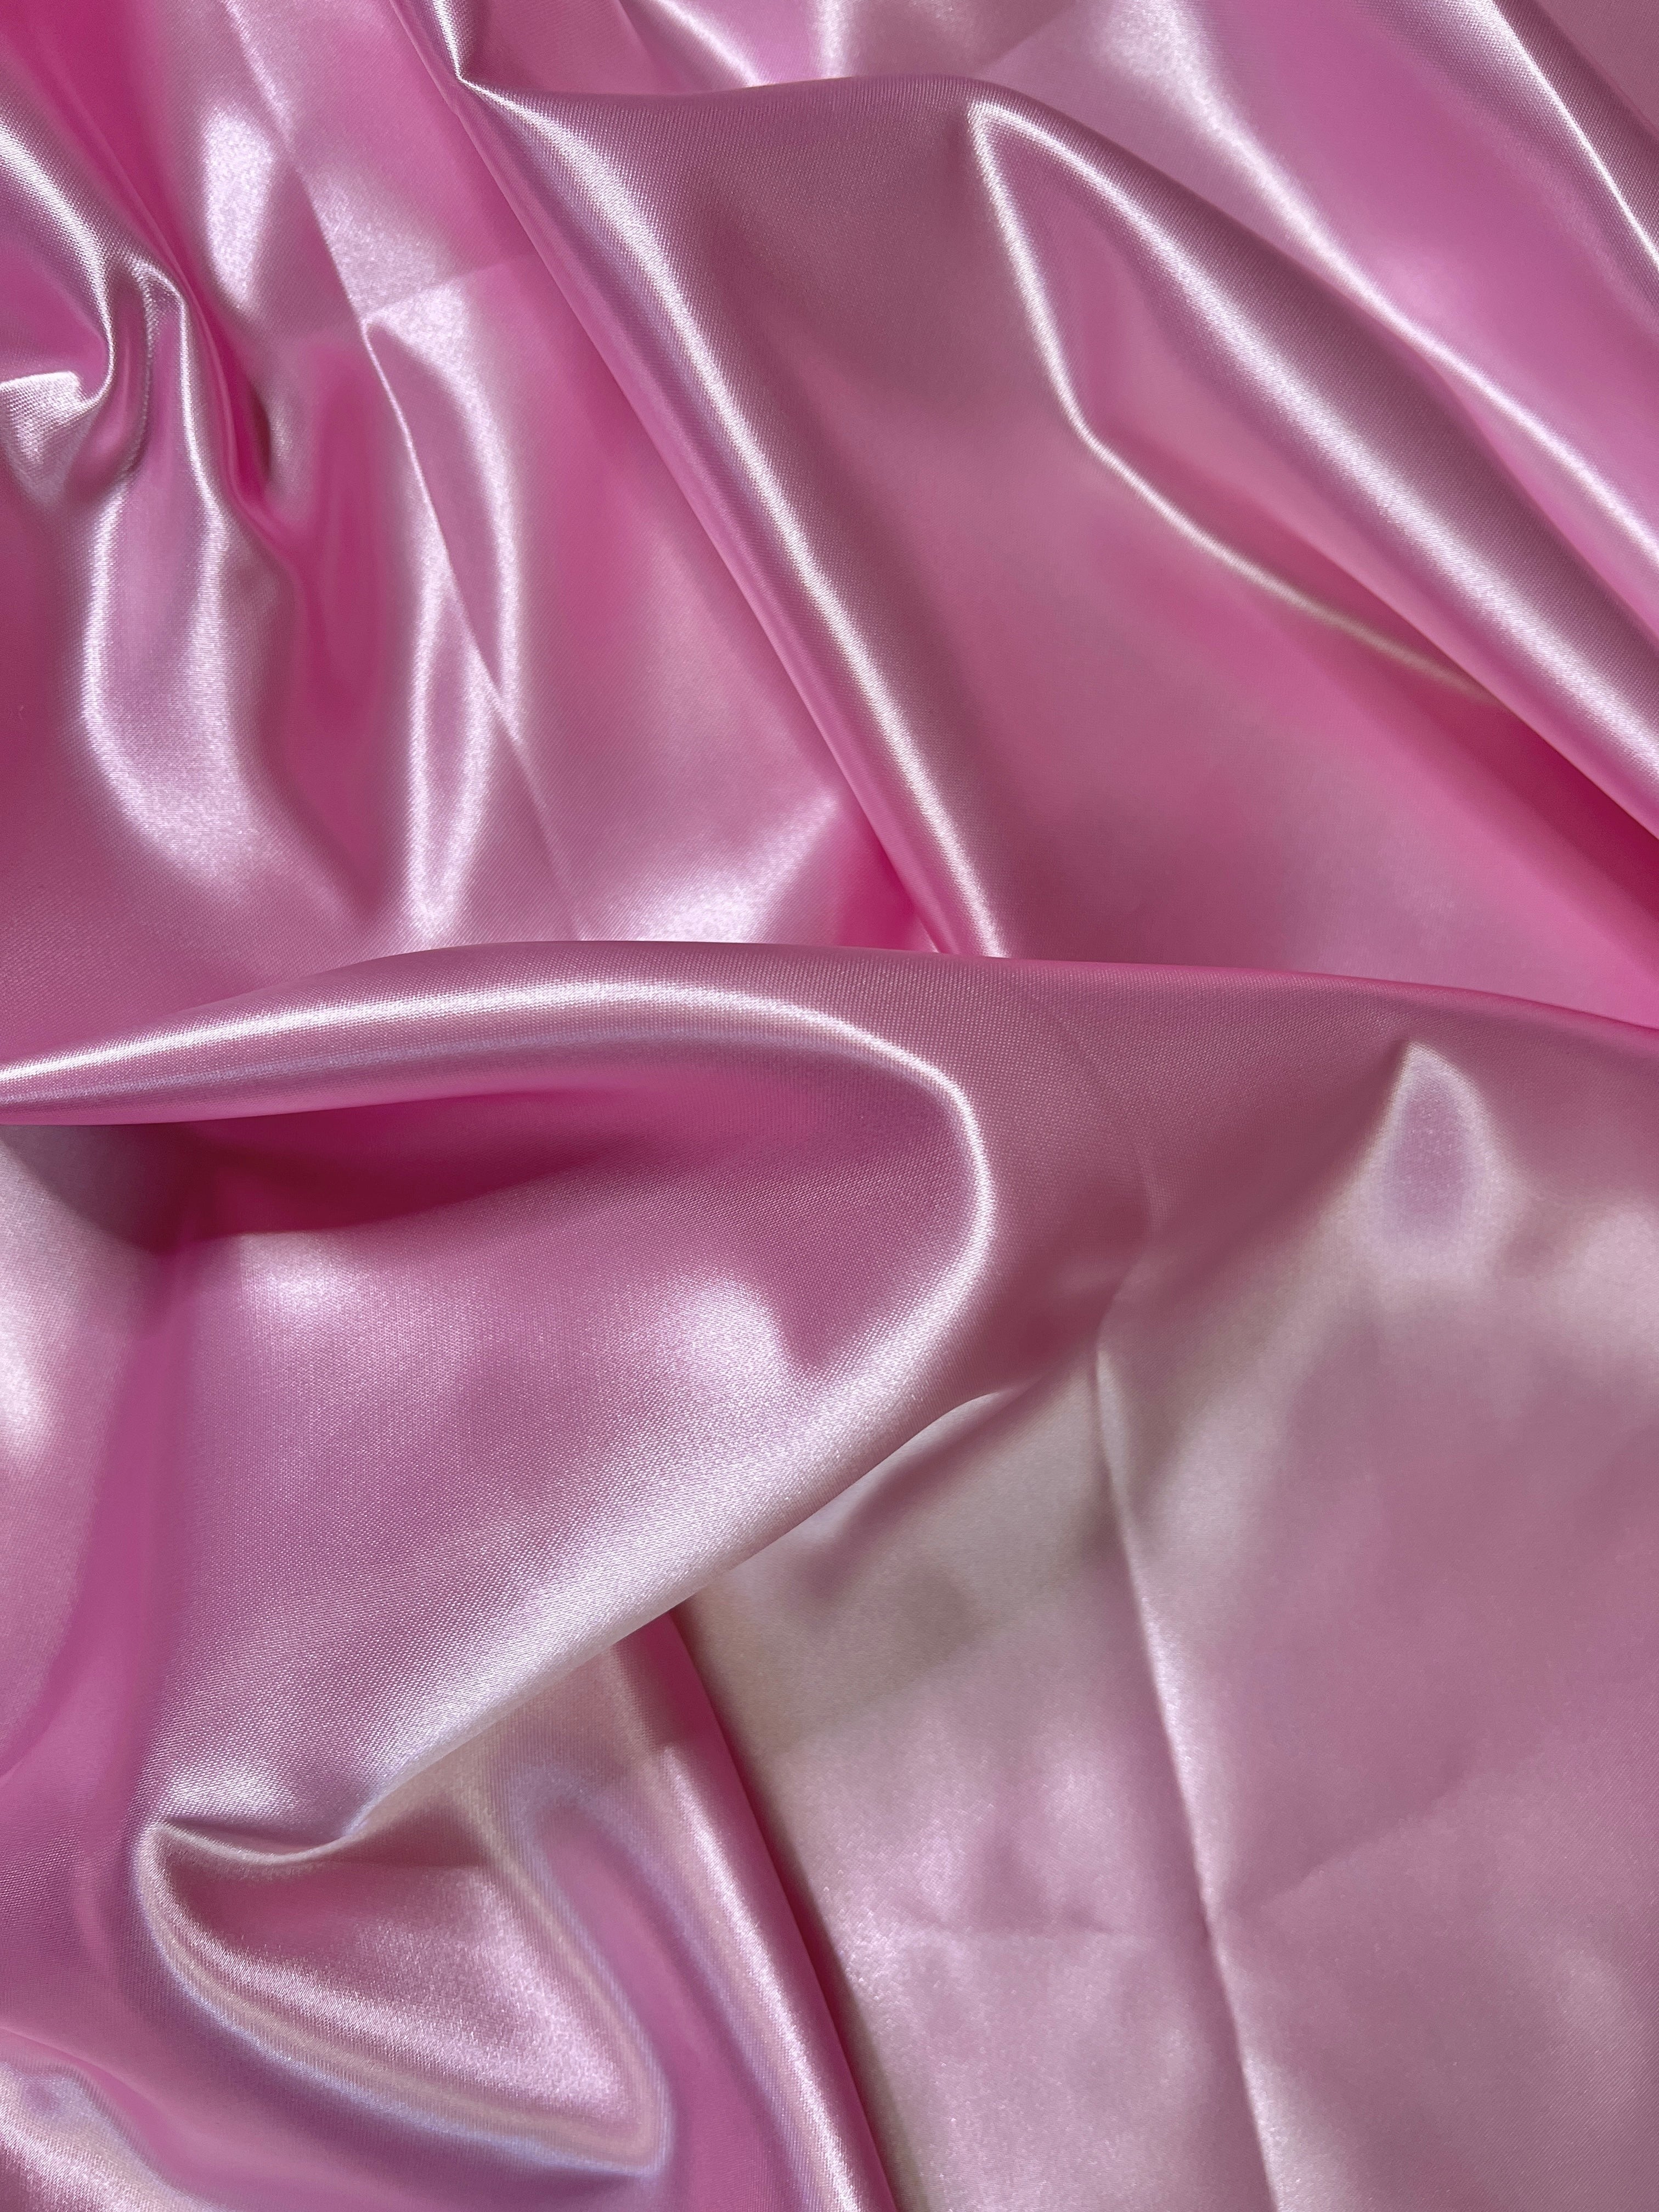 Pink Duchesse Satin Fabric, Pink Bridal Shiny Satin by yard, Light Pink Heavy Satin Fabric for Wedding Dress, pink for woman, best satin, premium satin, cheap satin, luxury satin, satin usa, satin los angelos,best quality satin